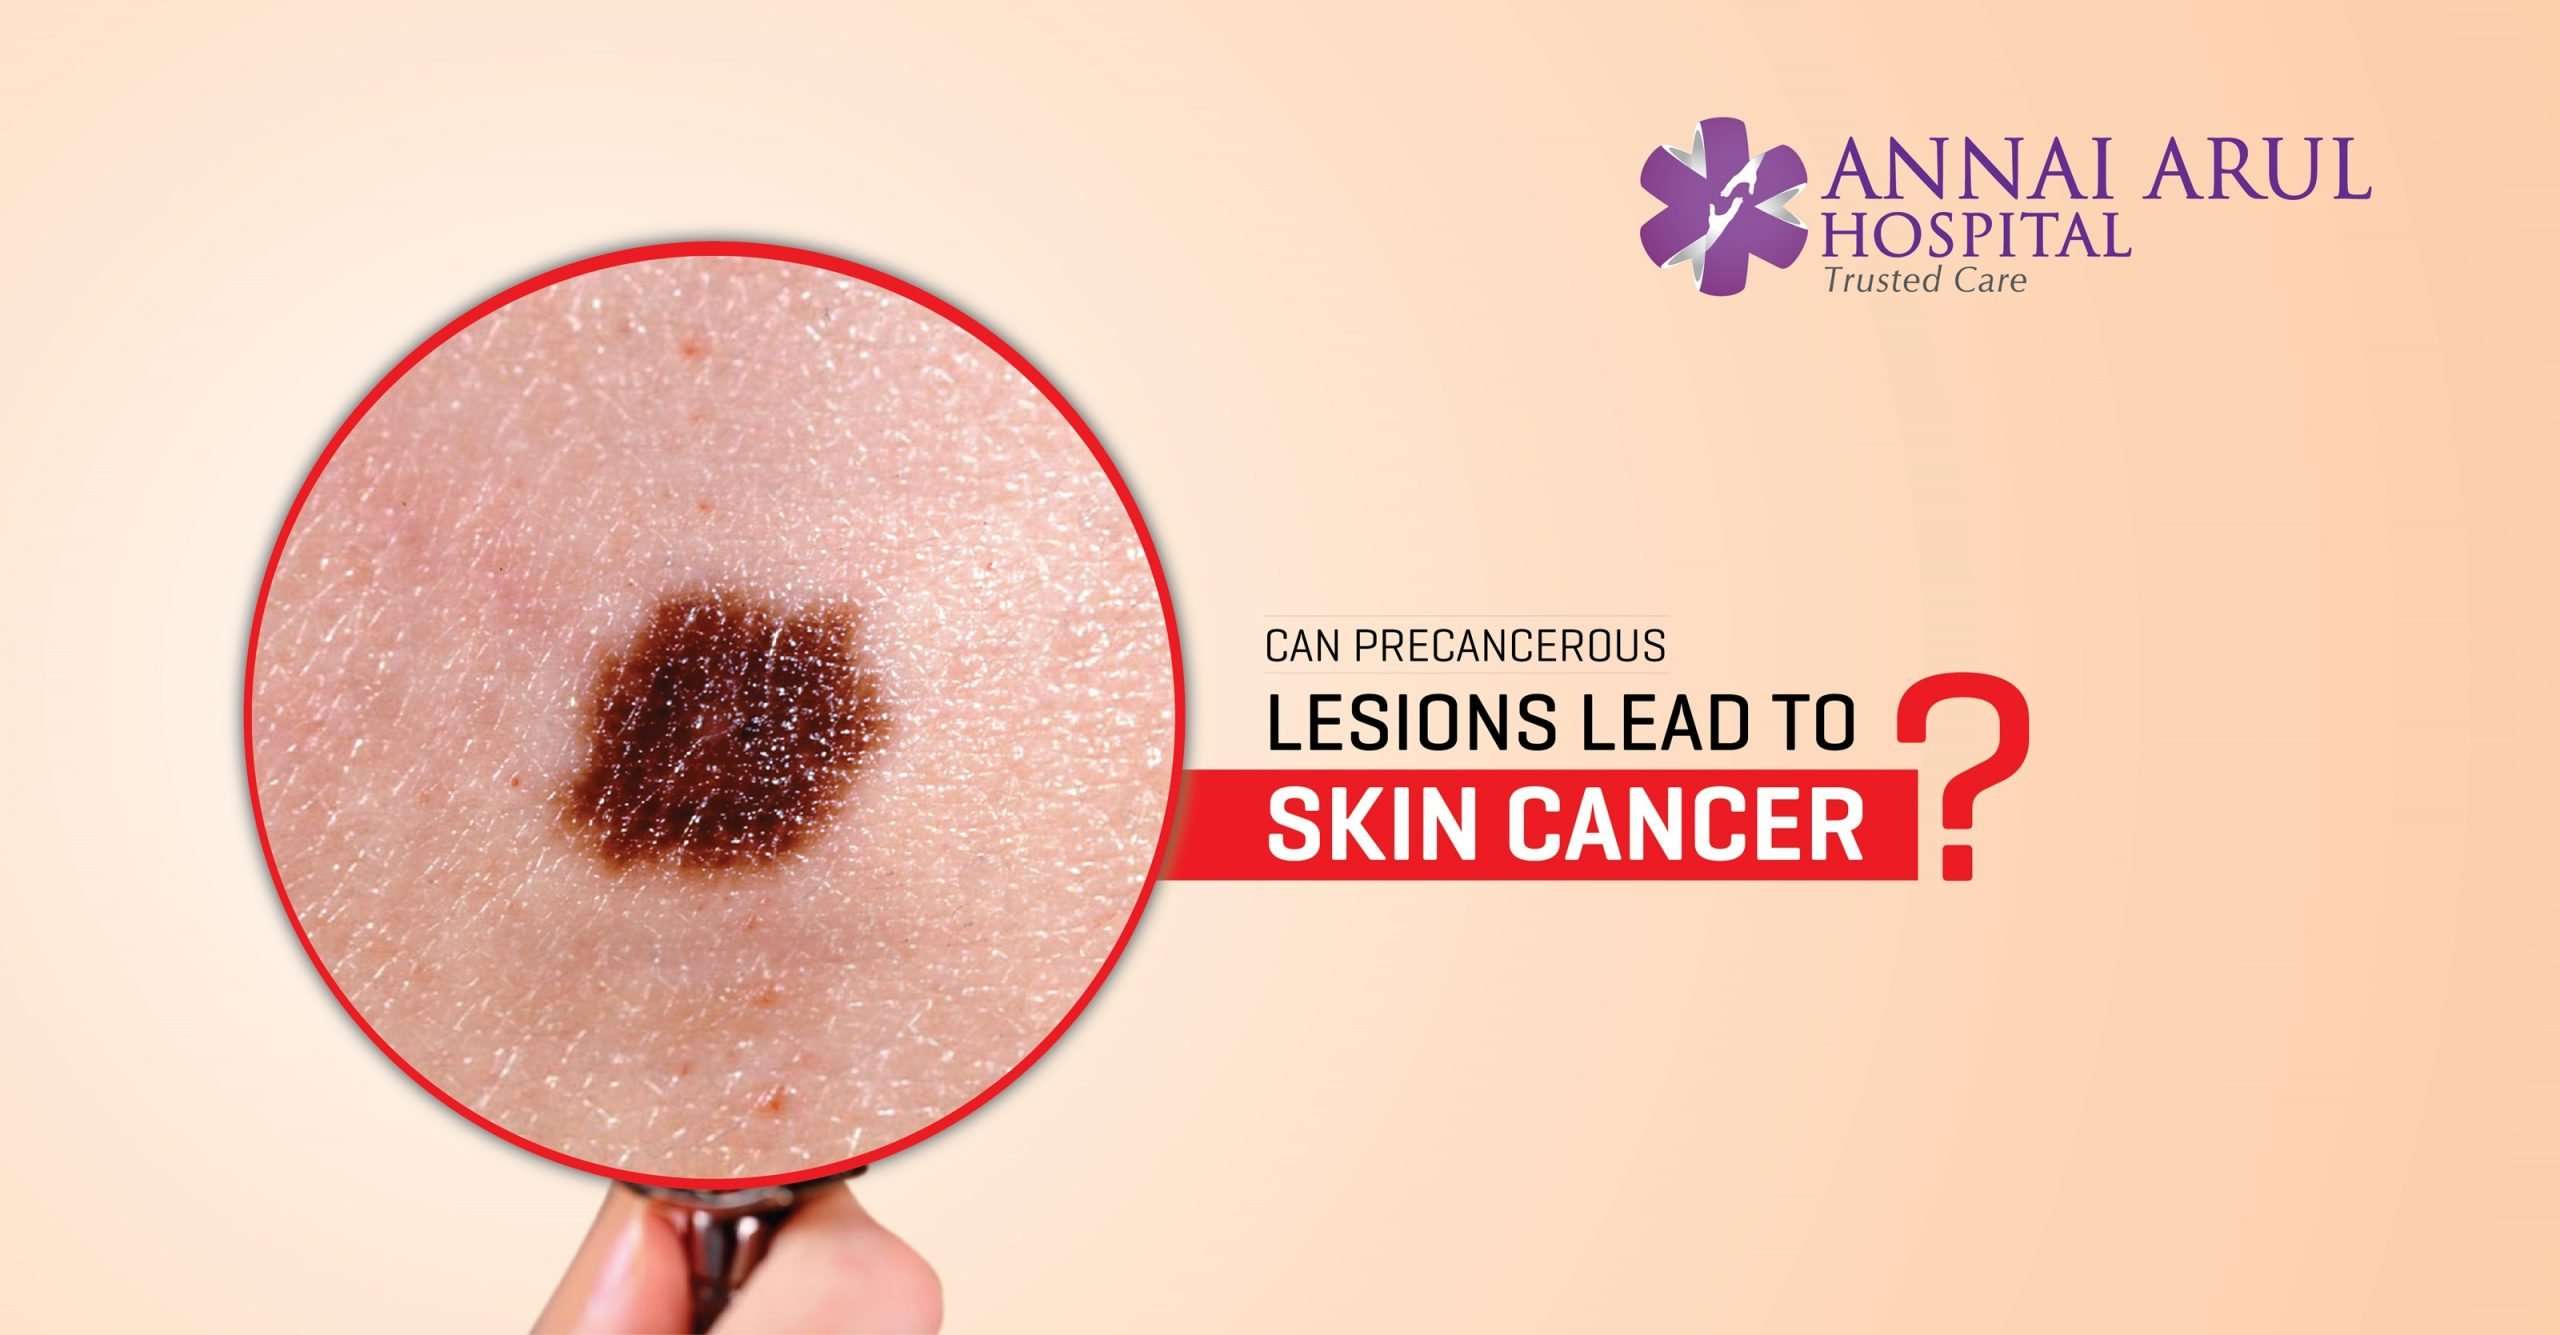 CAN PRECANCEROUS LESIONS LEAD TO SKIN CANCER ...